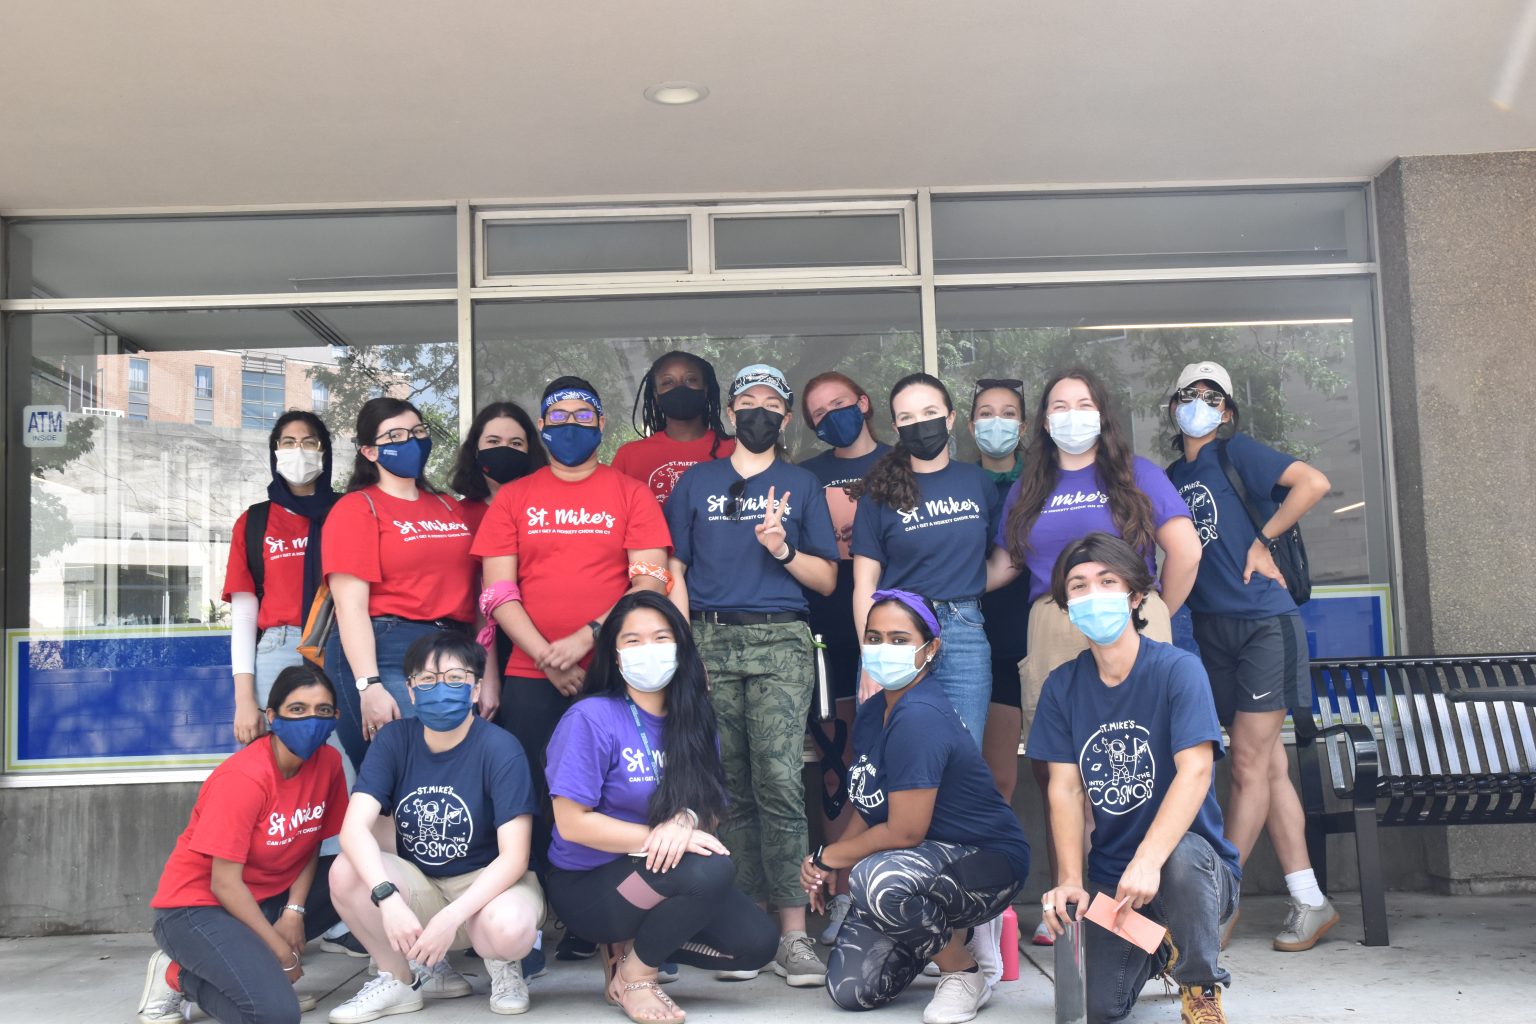 A photograph of the St. Mike's Orientation leaders, masked and posed in front of the COOP in Brennan Hall